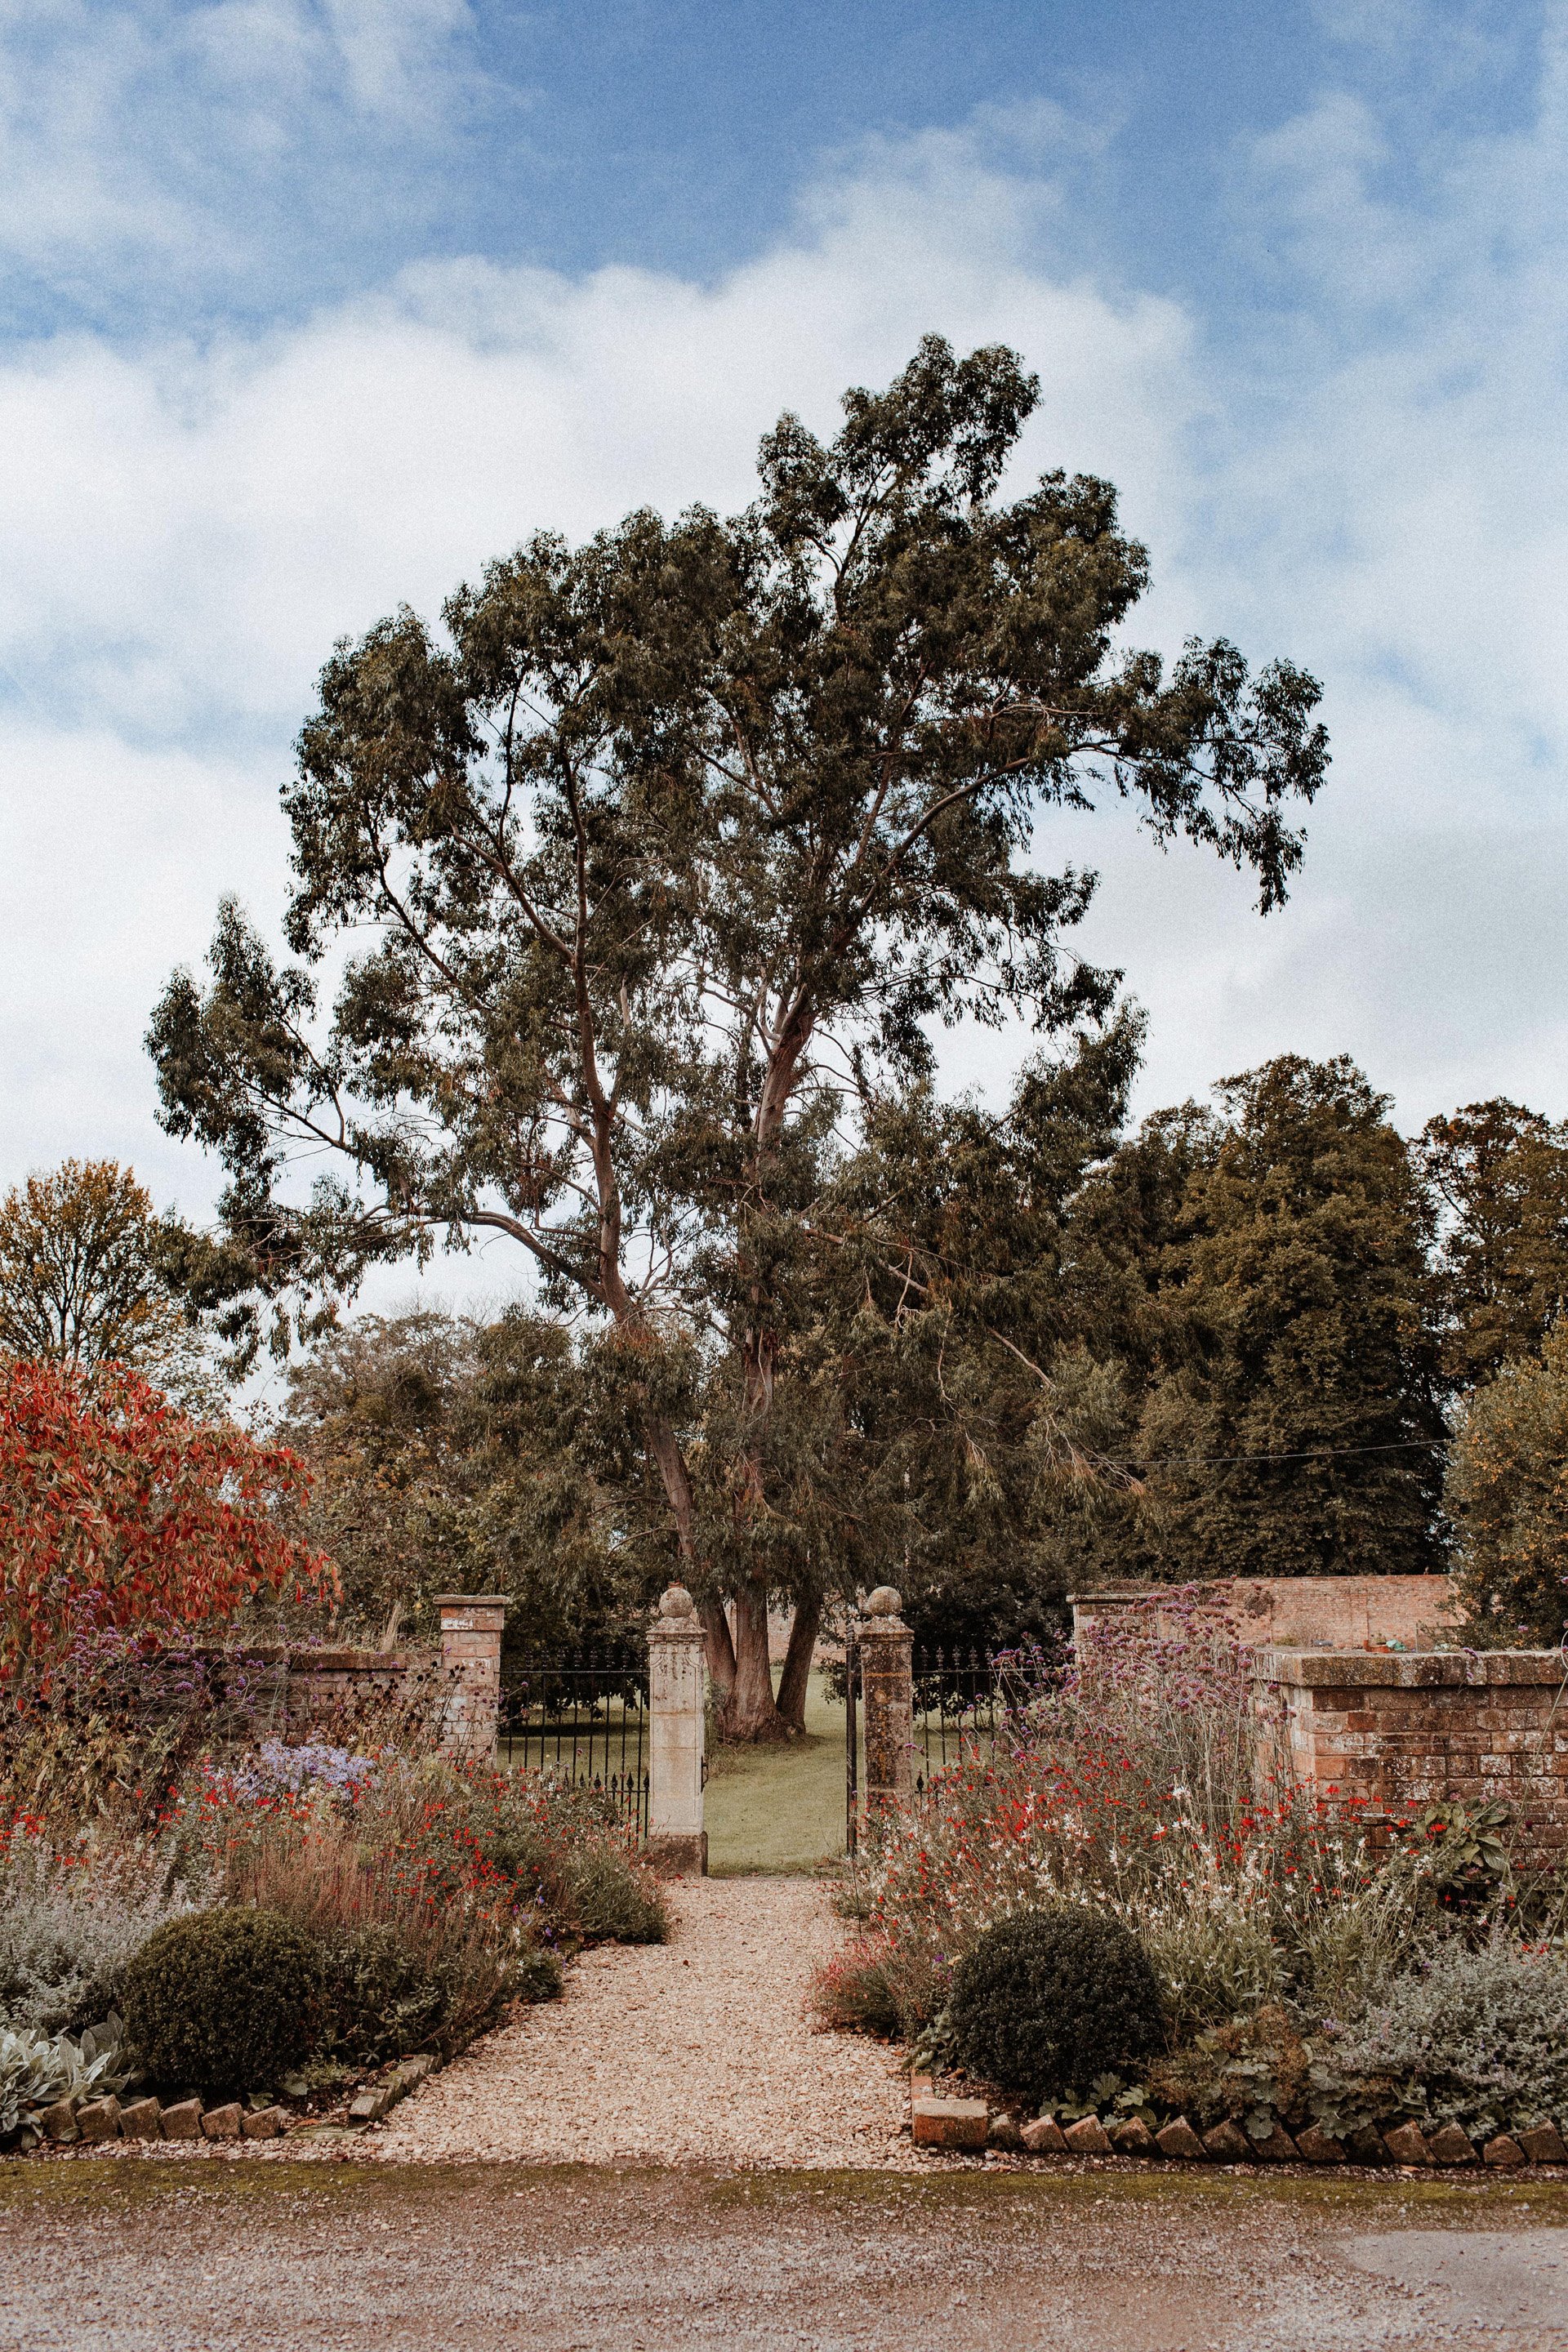 The walled garden at Elmore Court in the autumn